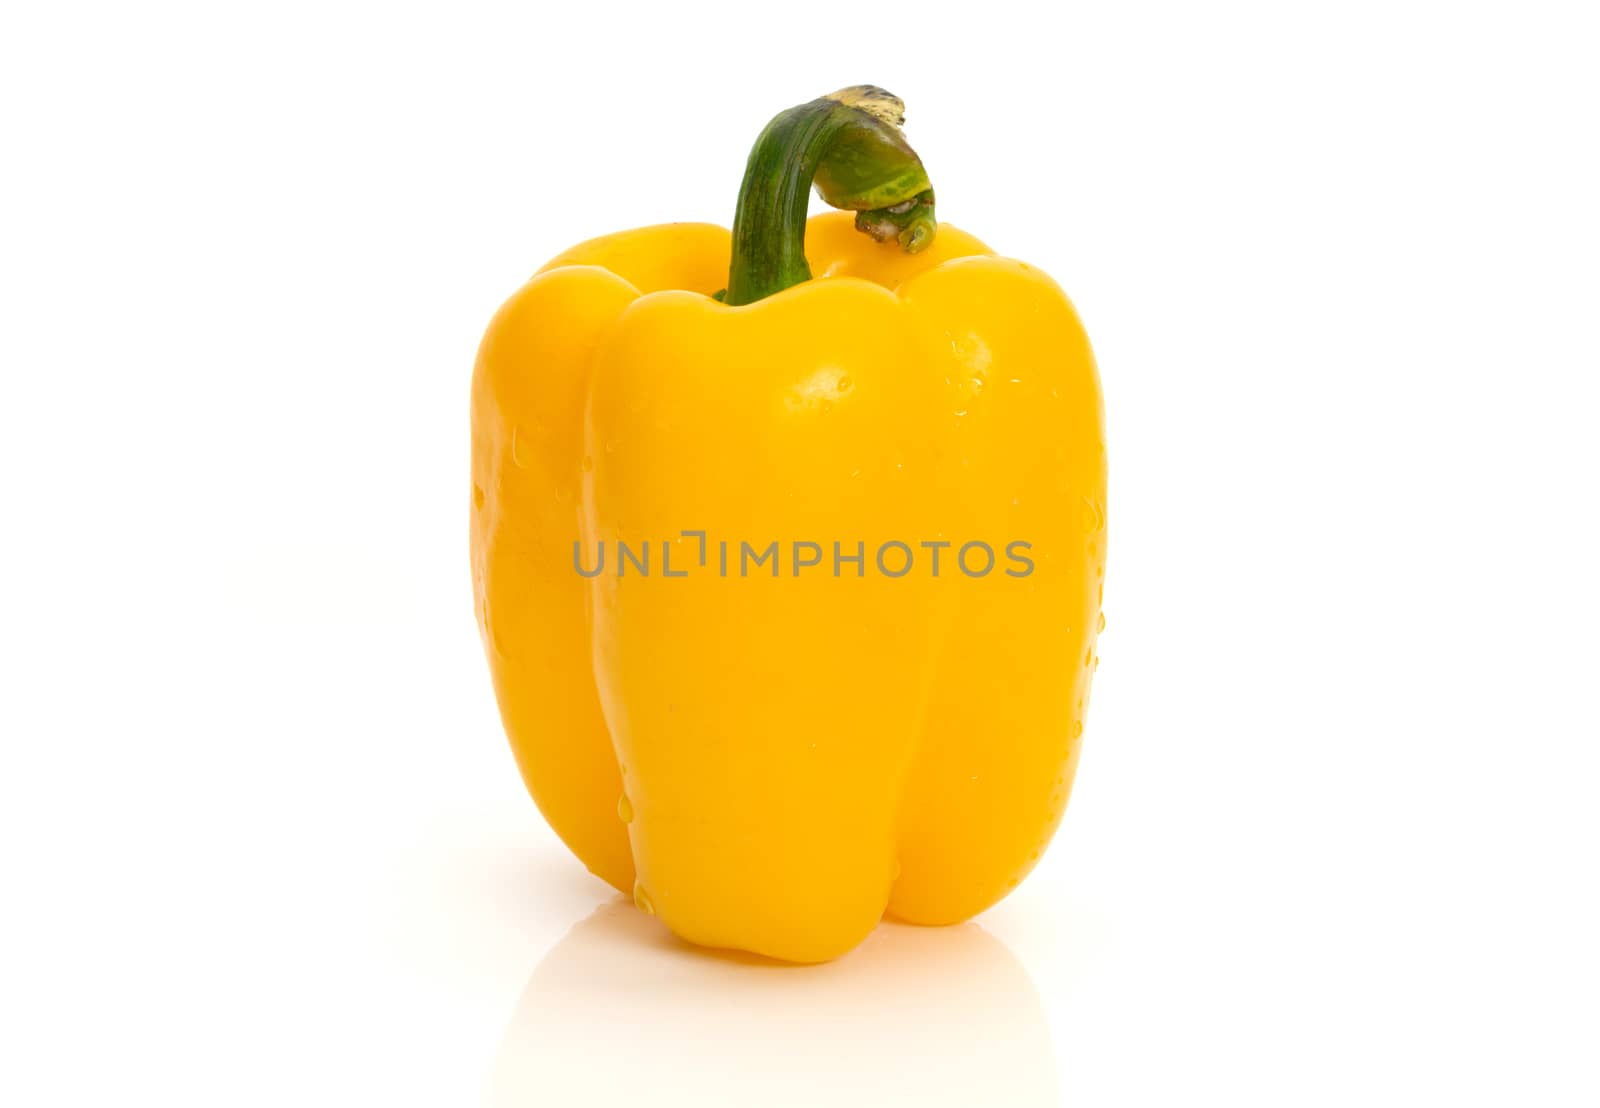 Large bell pepper yellow on a white background by sompongtom